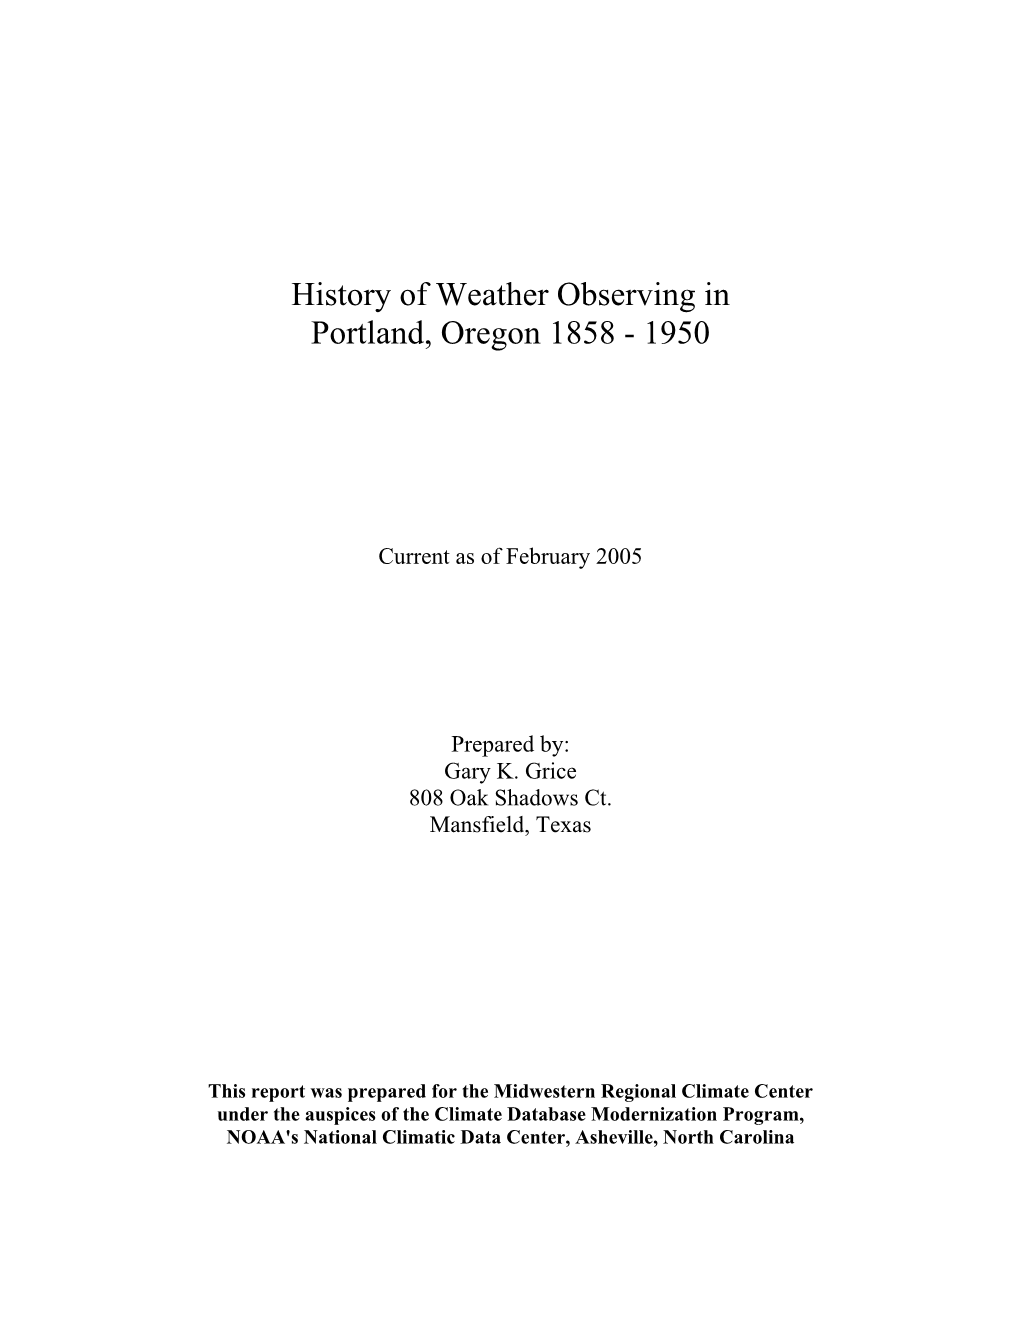 History of Weather Observing in Portland, Oregon 1858 - 1950